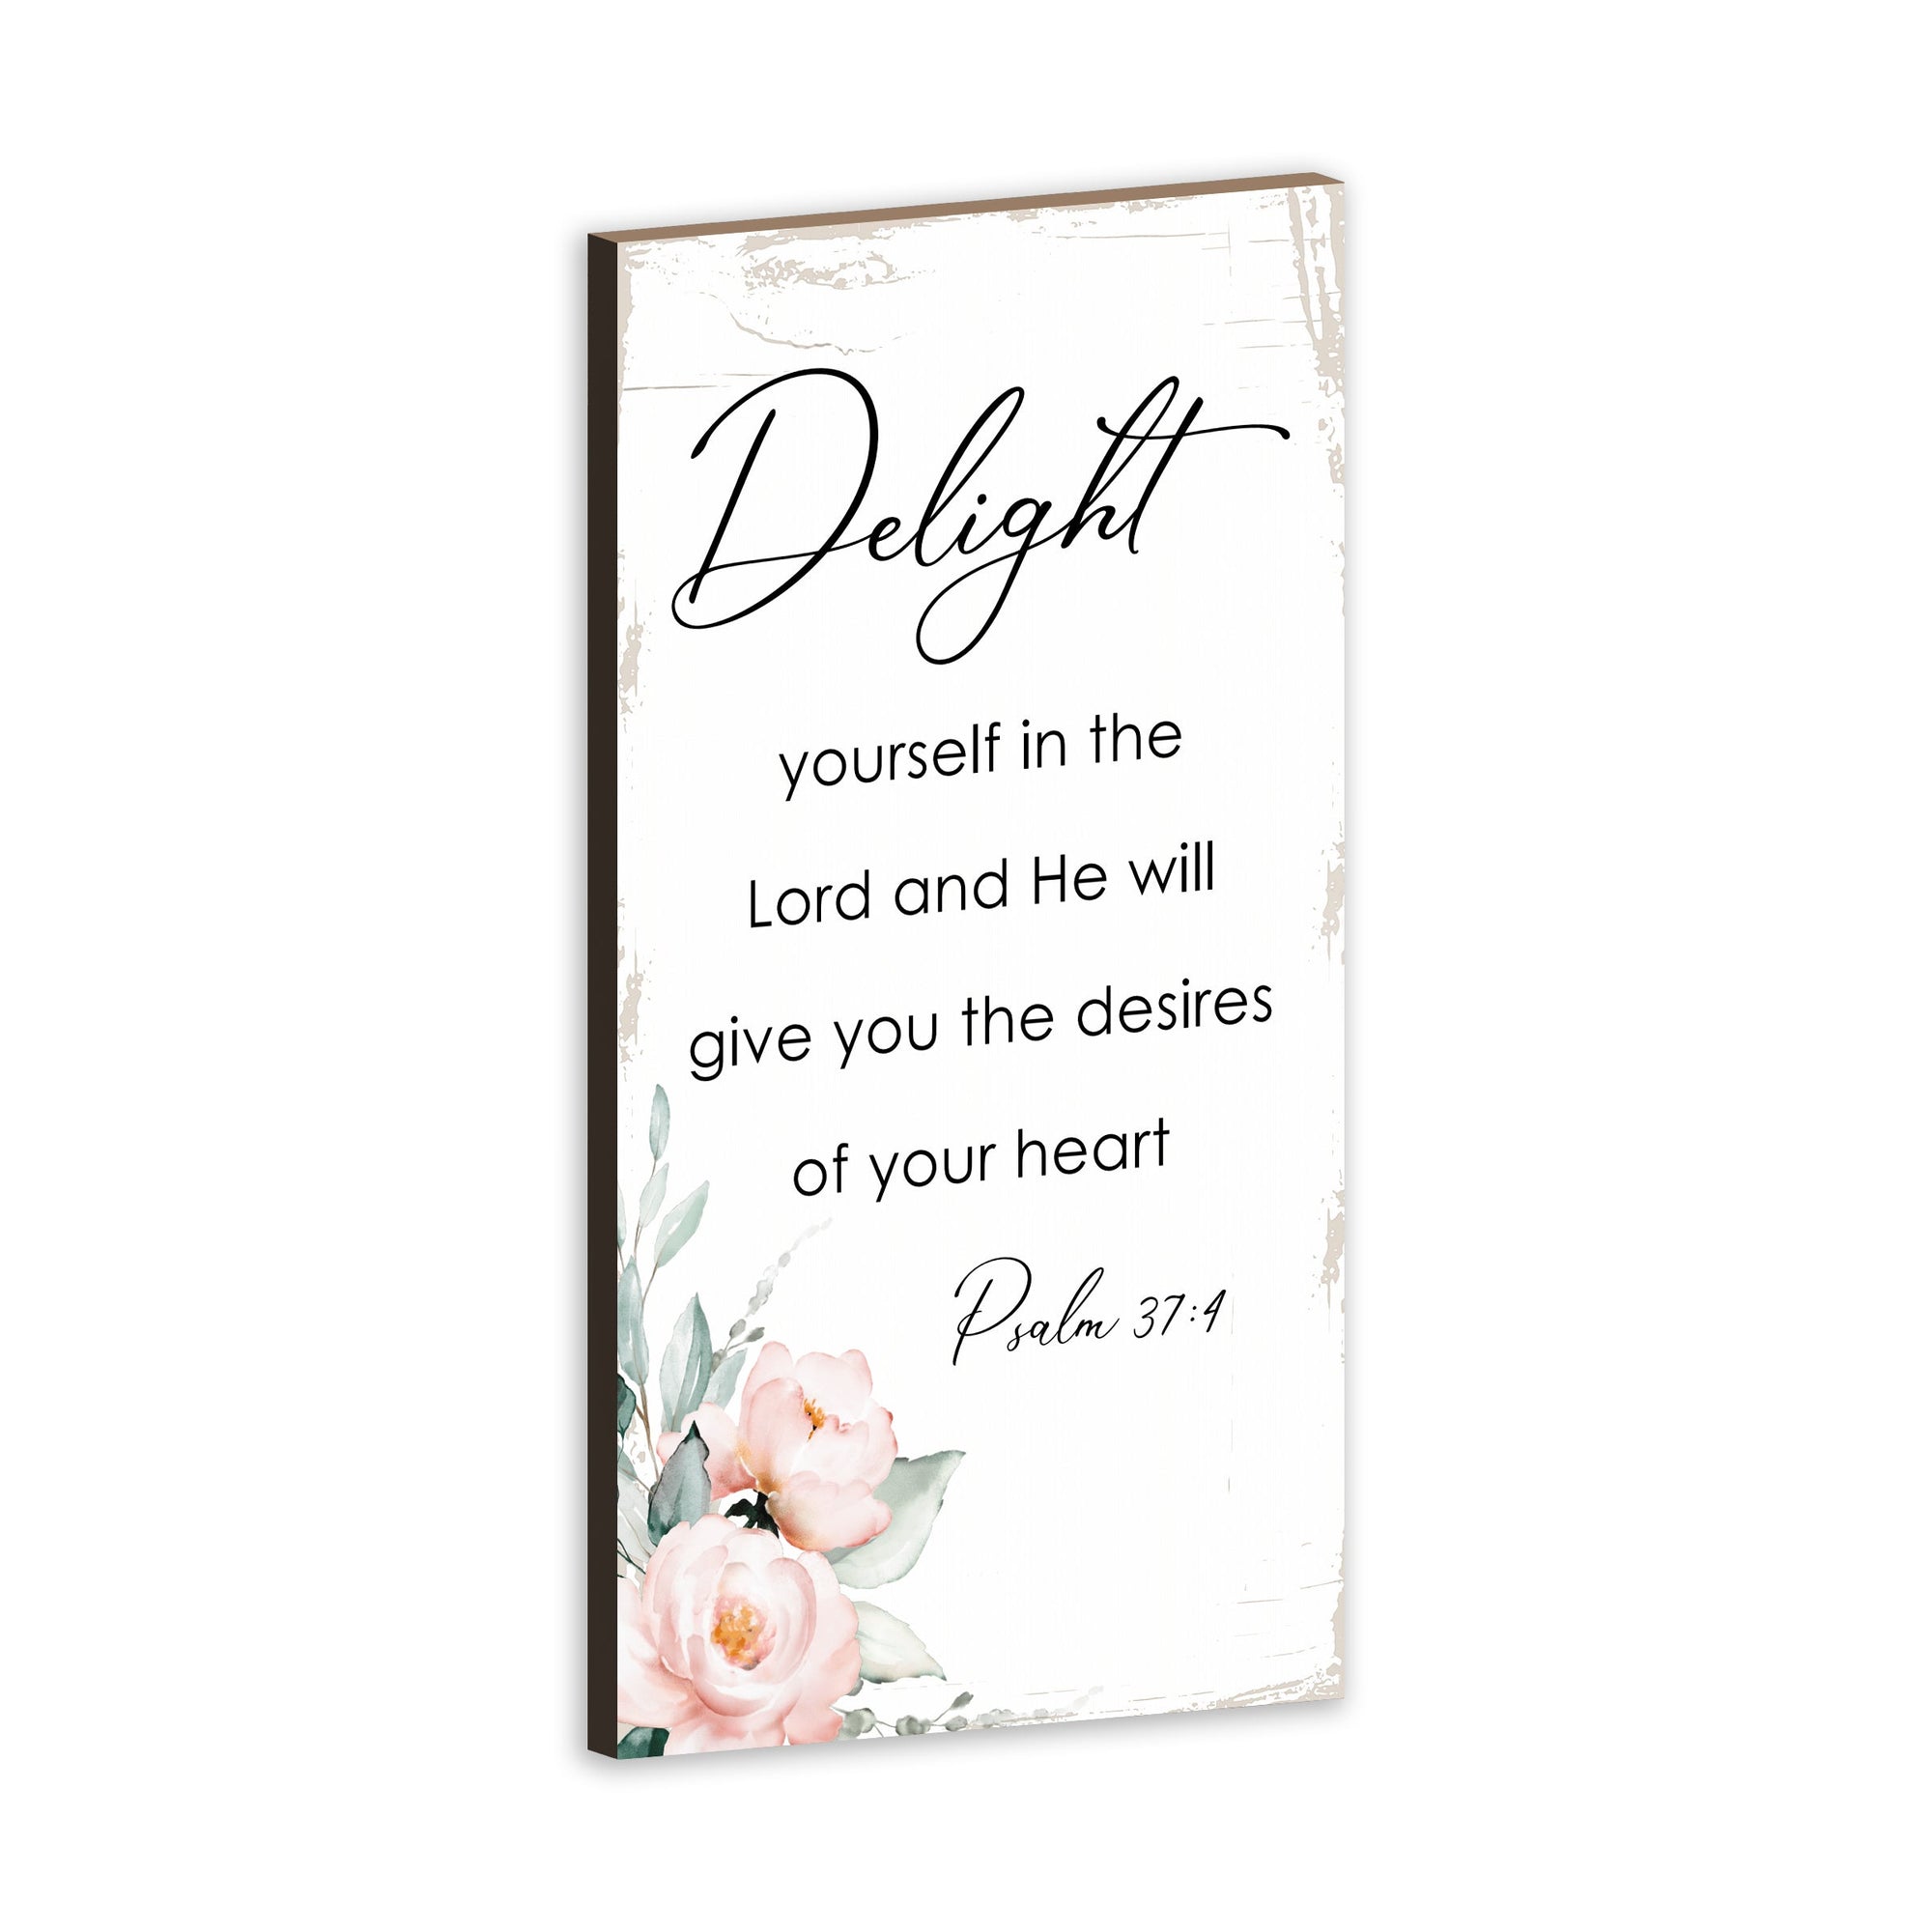 A beautifully crafted wooden wall plaque, a perfect example of wall decor gifts.